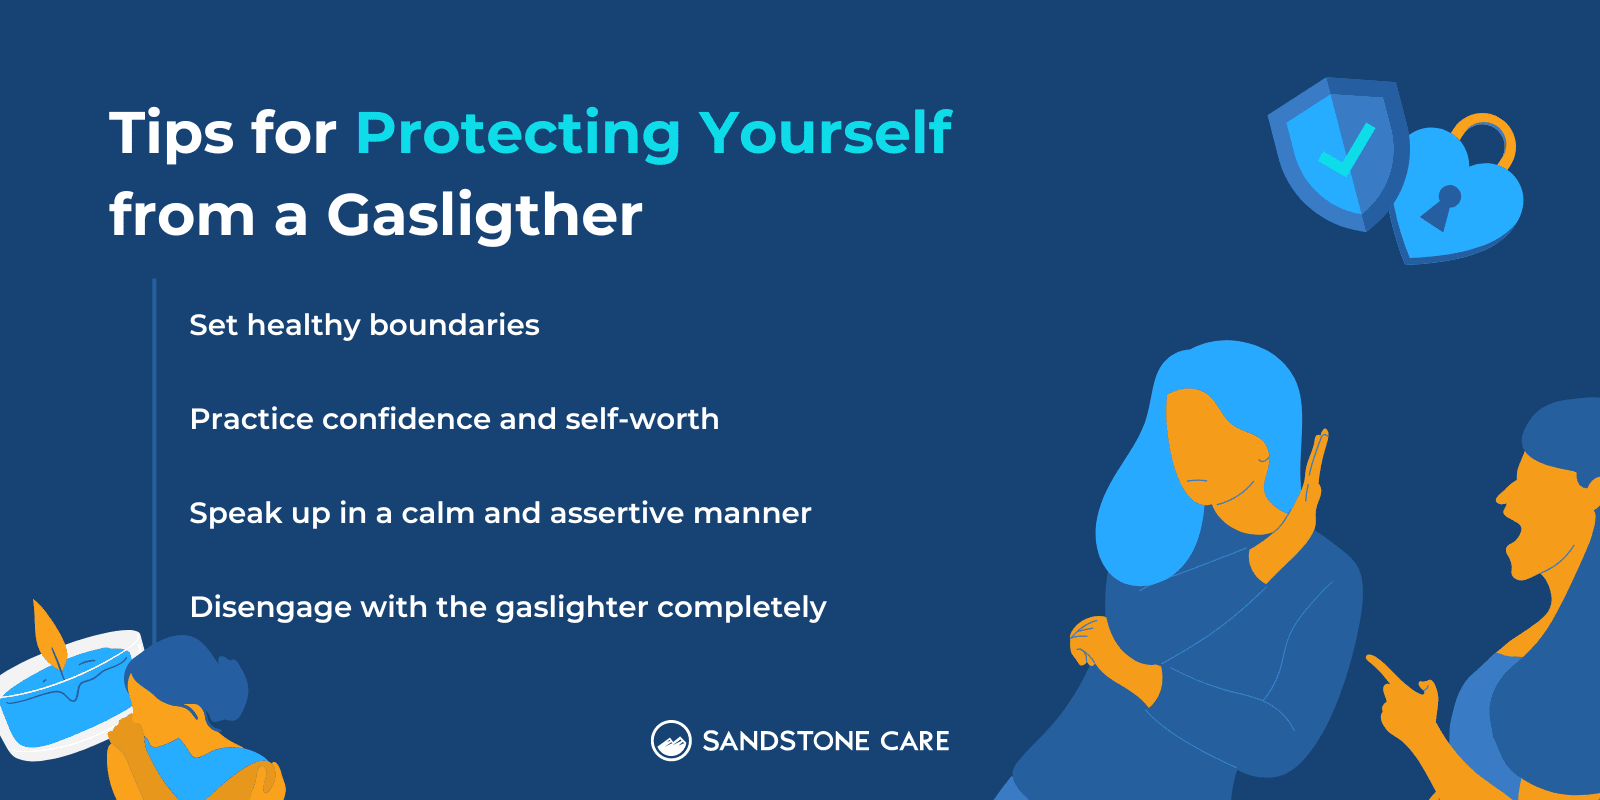 4 Tips to protecting your mental health from a gaslighter listed out with relevant illustration on a dark navy background